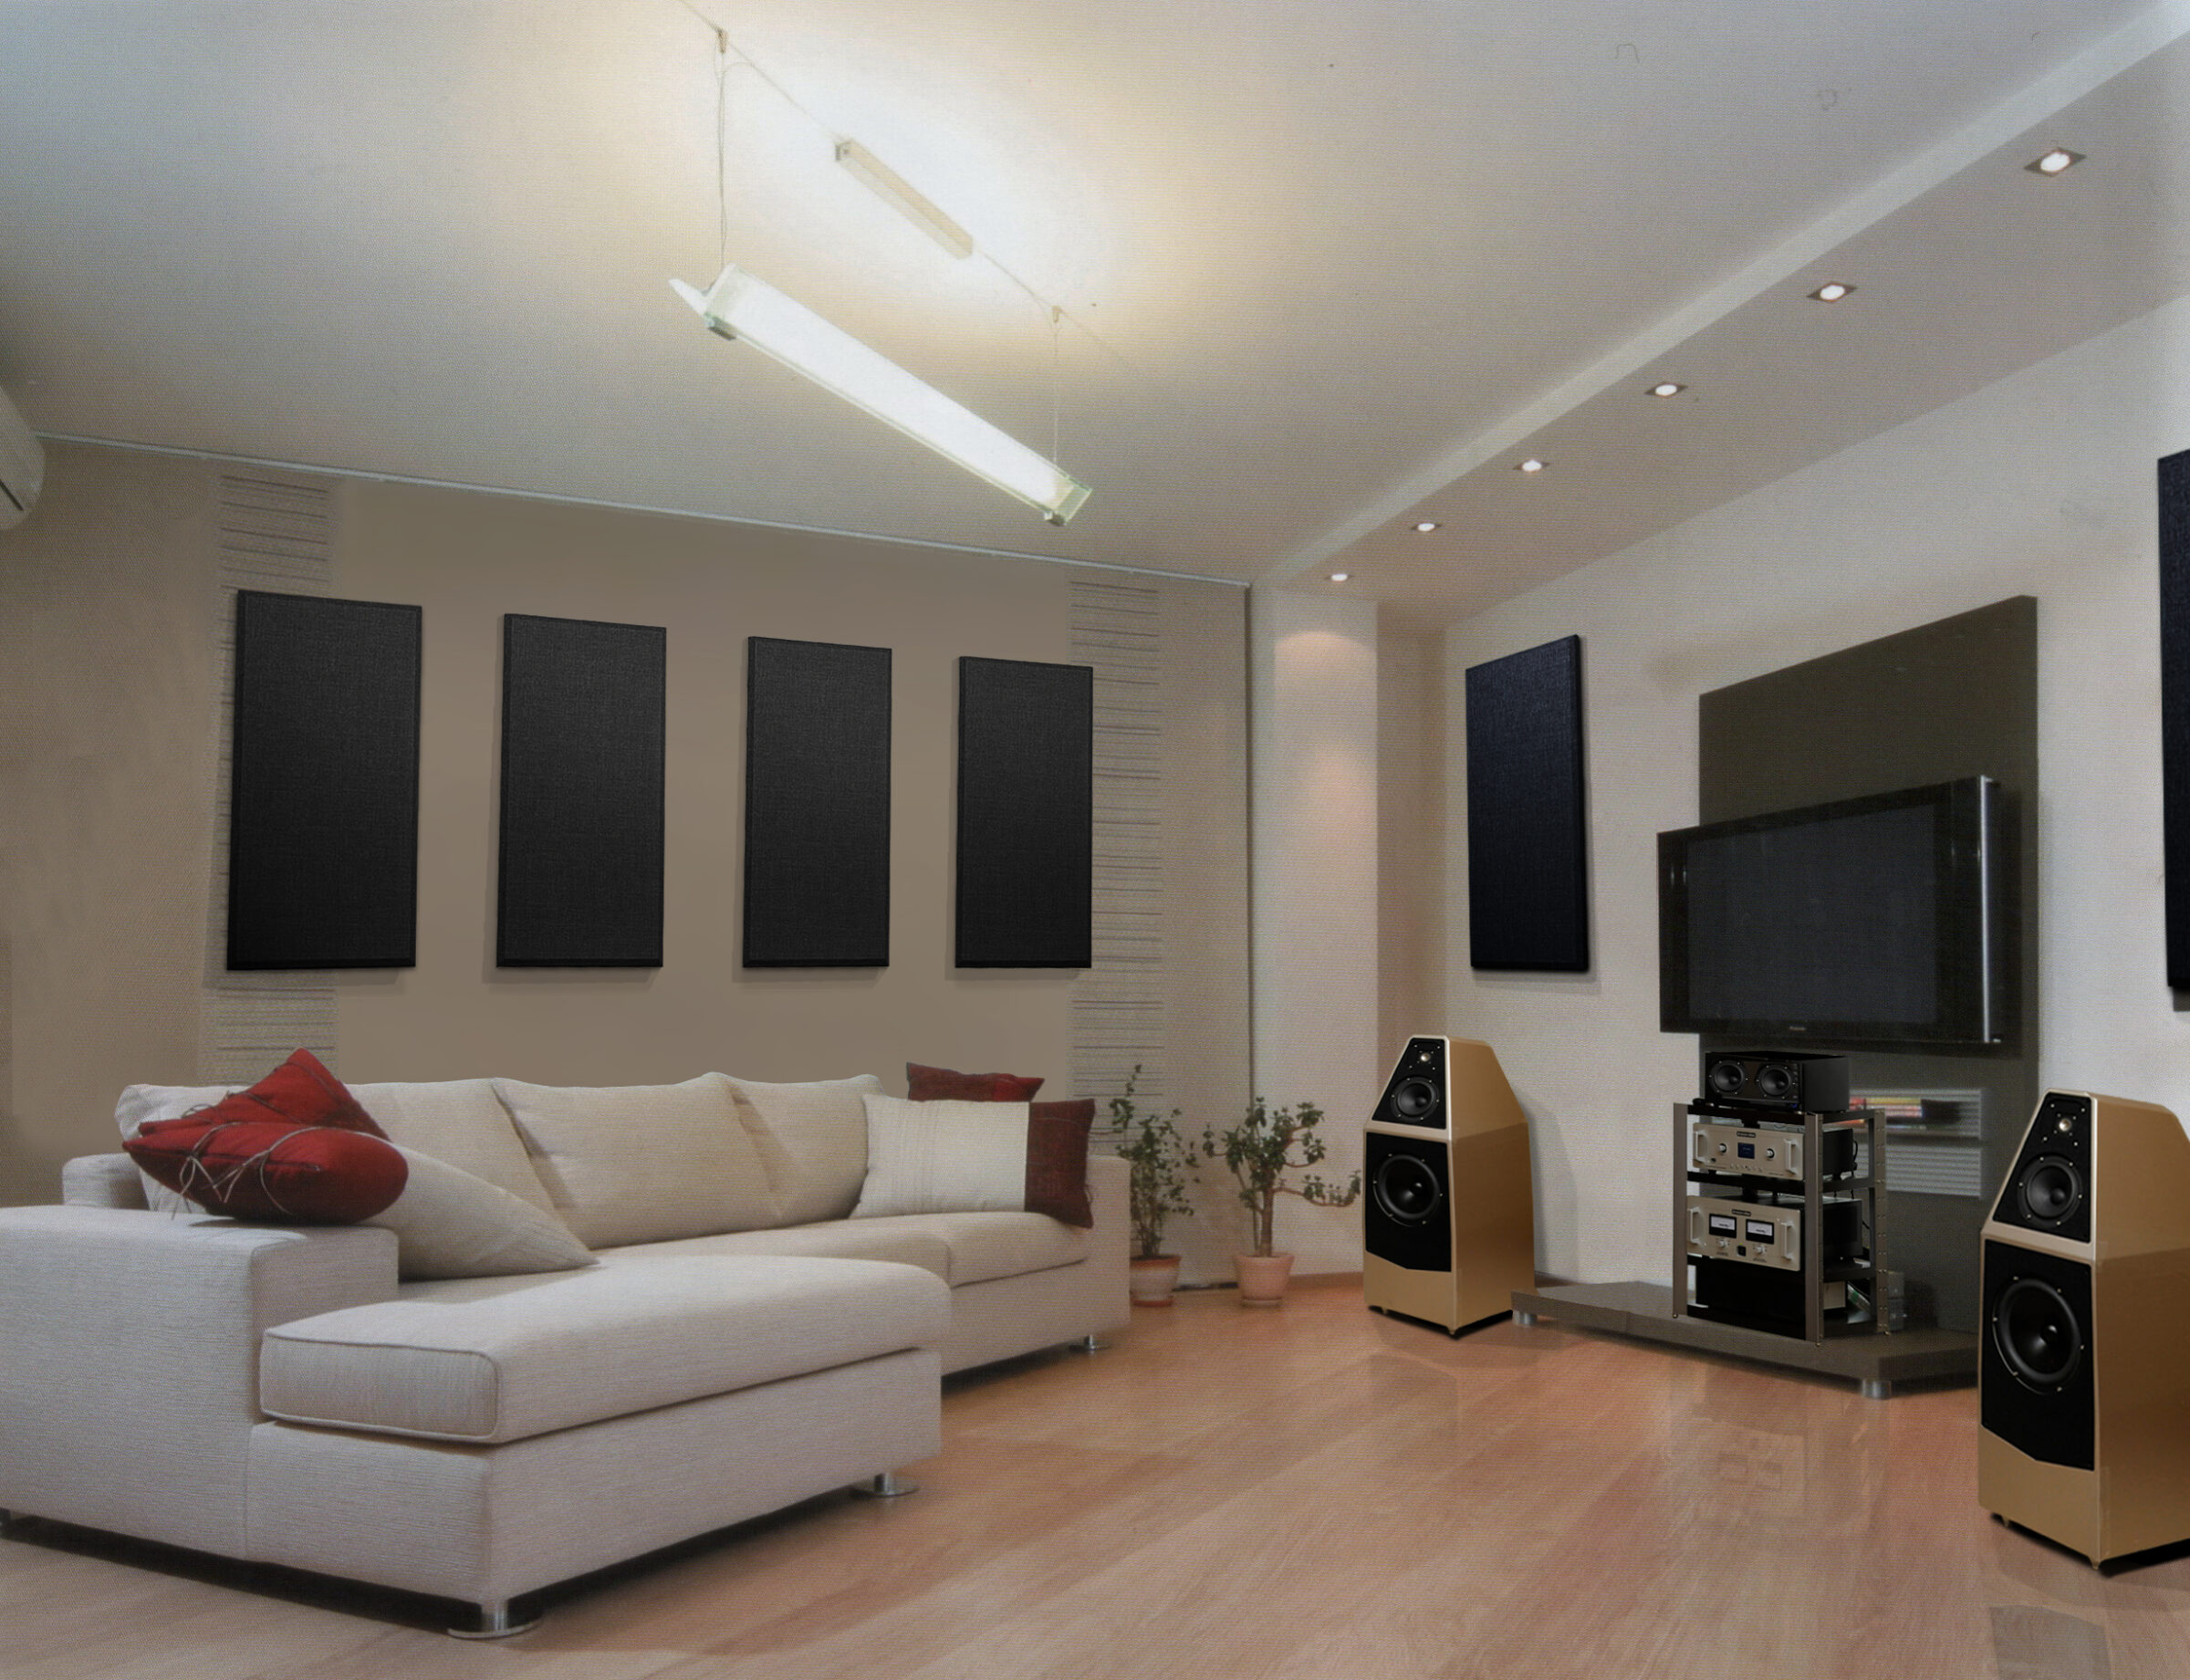 Hifi Room Big Couch Speakers Pic